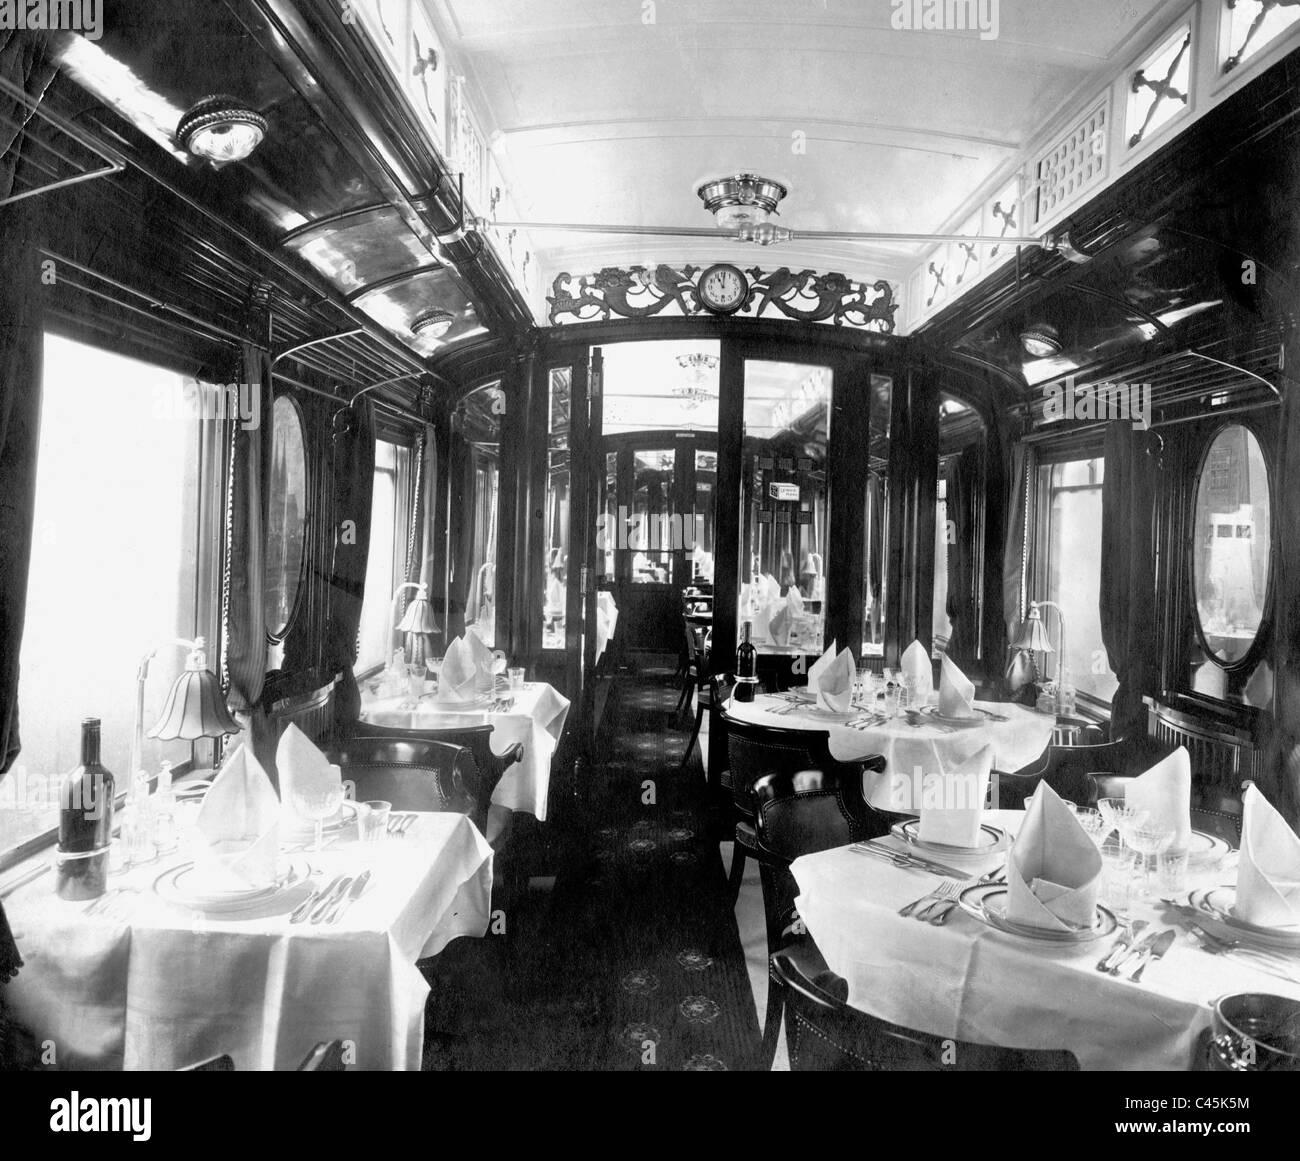 Dining car of the German Reich railway Stock Photo